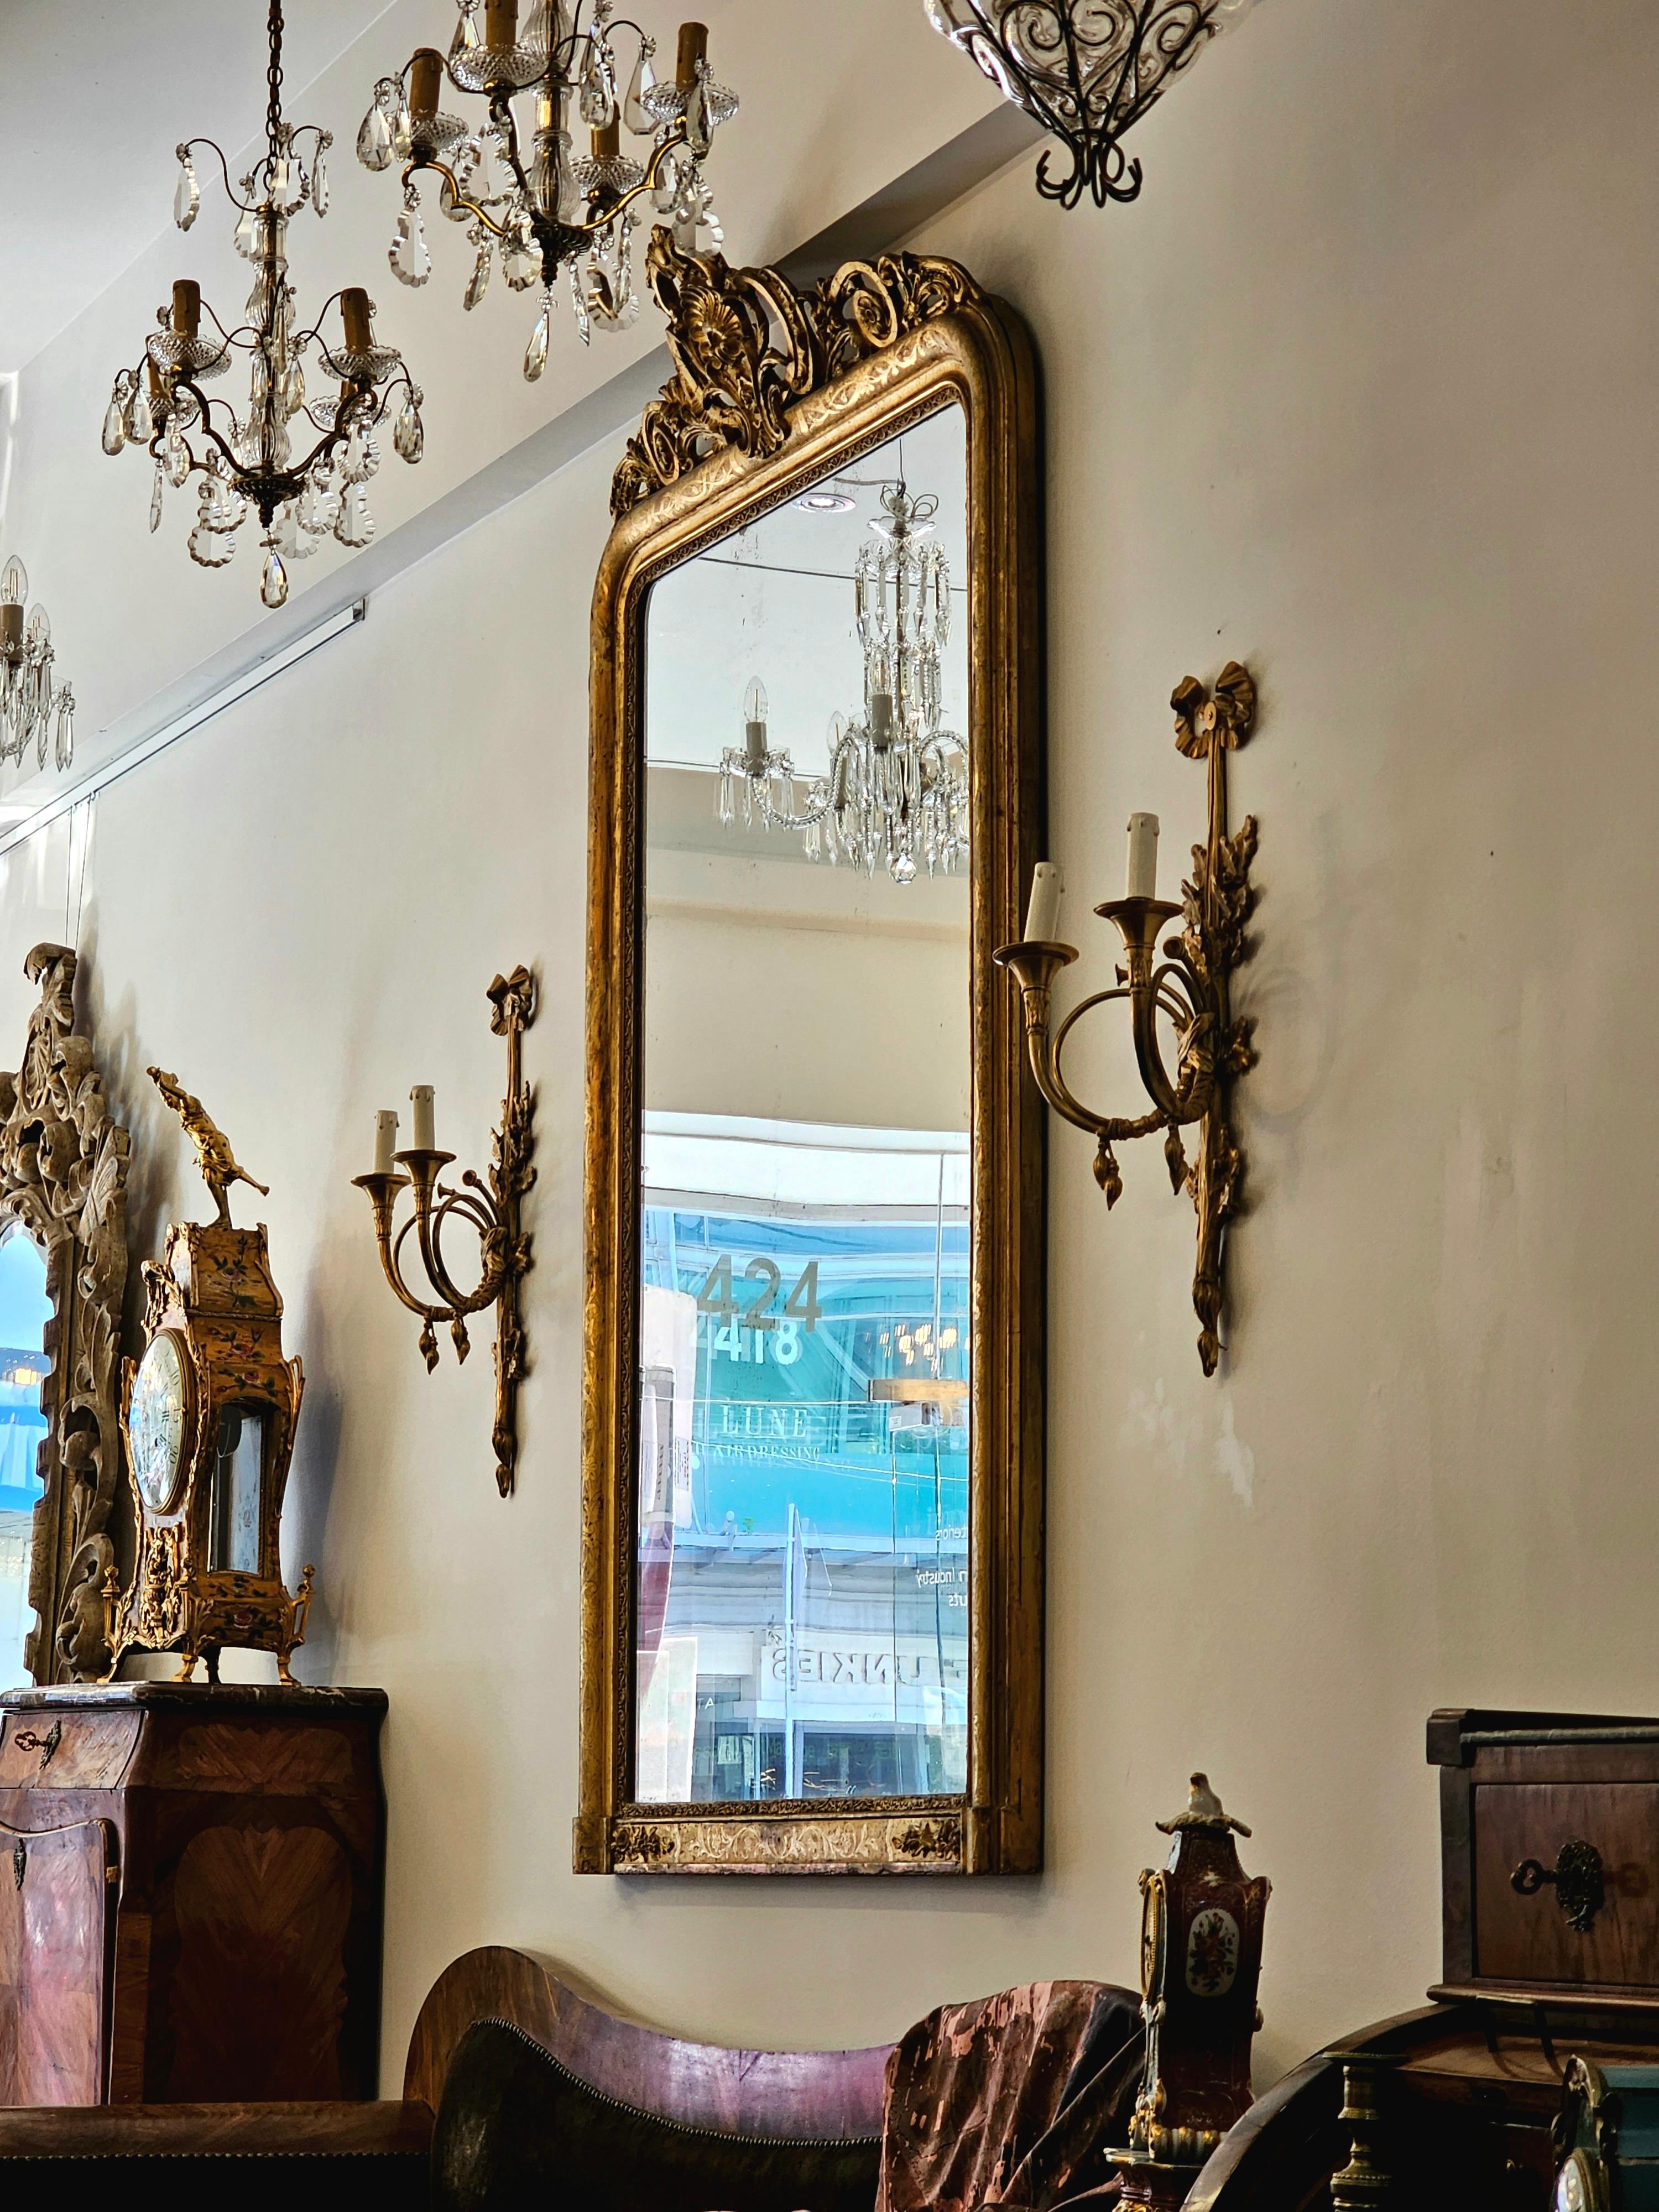 A Pair of Louis XVI Style Gilt Bronze 2 Light Horn/Trumpet Wall Sconces

Classically elegant and superb pair of Louis XVI Style ormolu two (2) light wall sconces.

Each pair features two (2) horn shaped branches strikingly decorated with petite